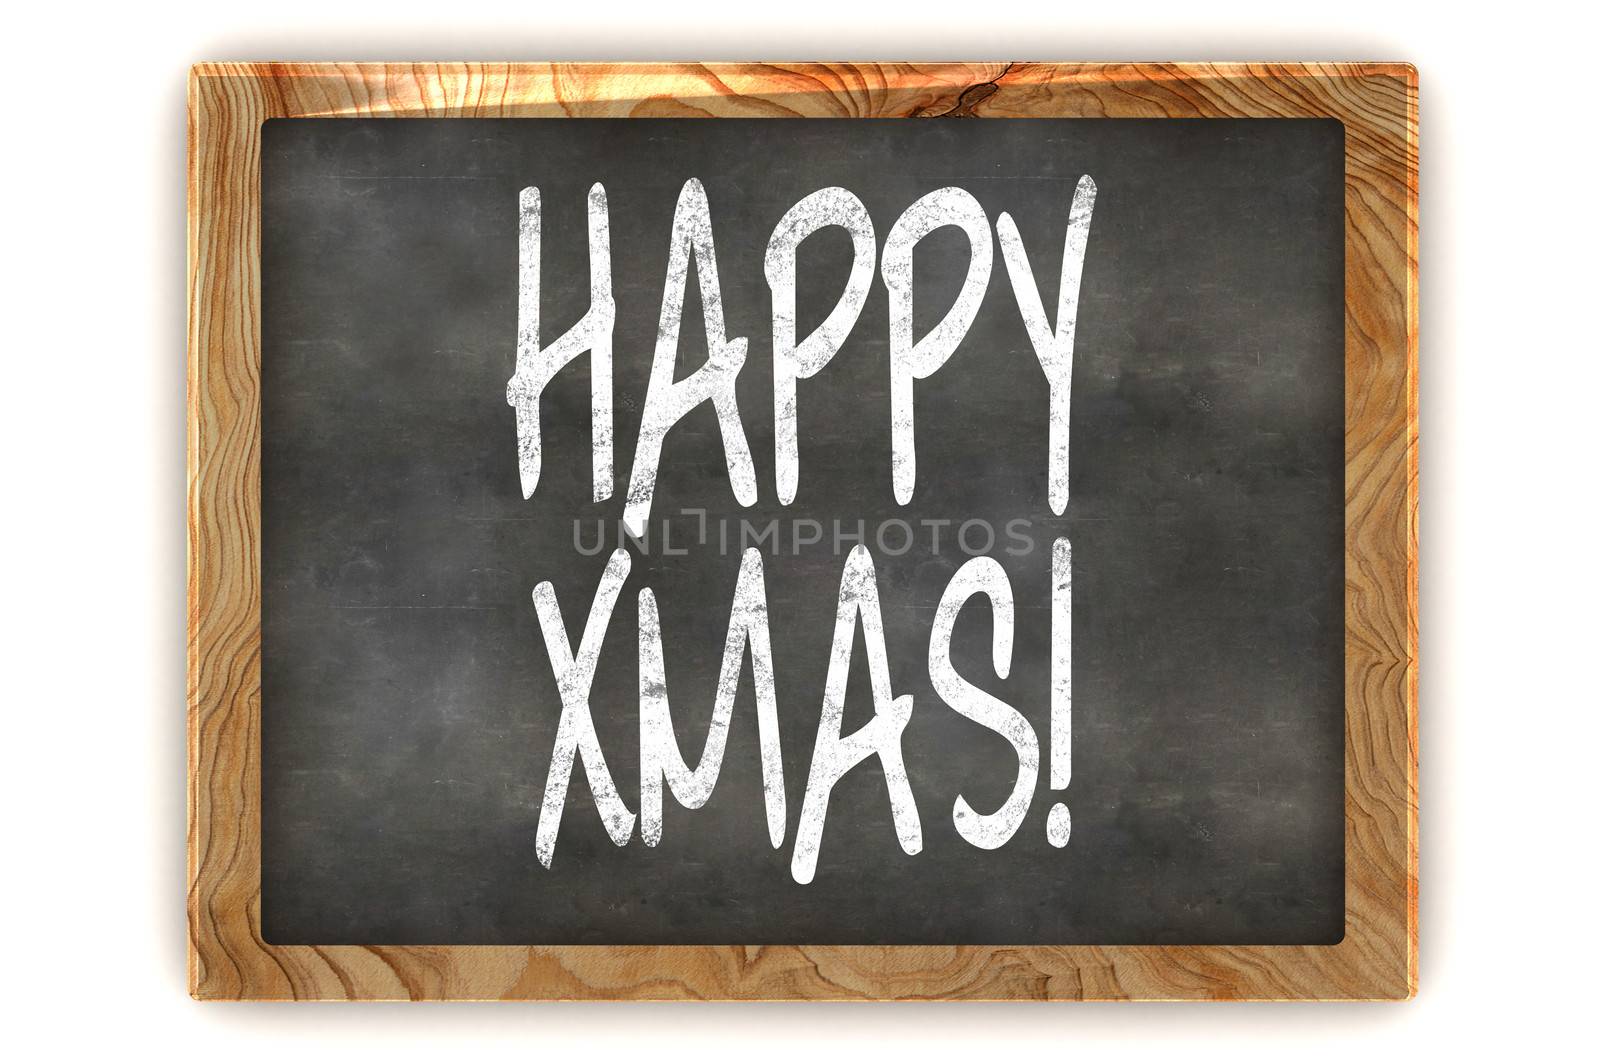 A Colourful 3d Rendered Illustration of a Blackboard Showing Happy Xmas